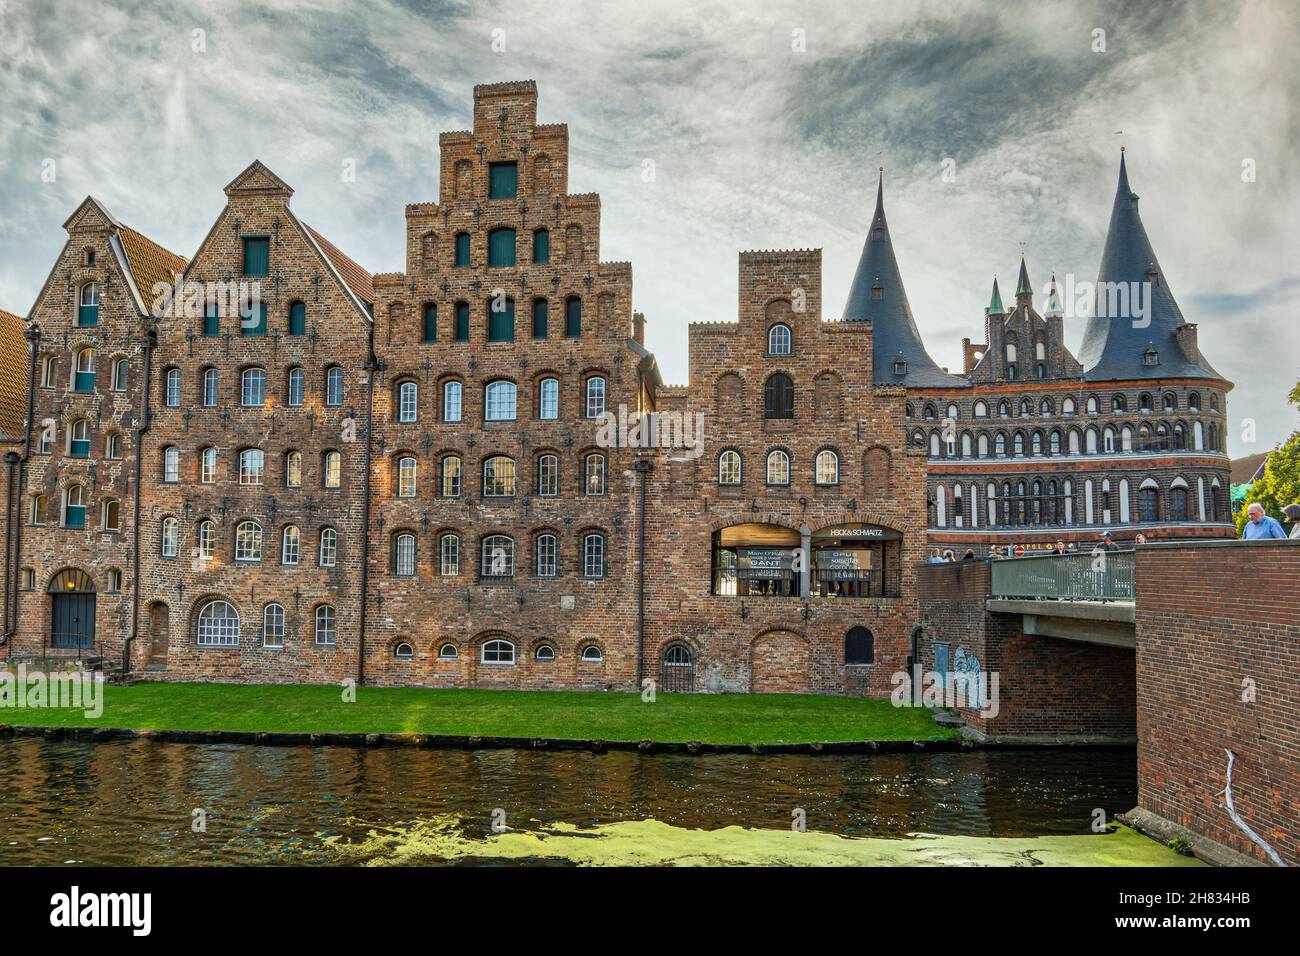 Salt warehouses in Lübeck, behind the medieval gate of the Holstentor. Luebeck, Schleswig-Holstein, Germany, Europe Stock Photo